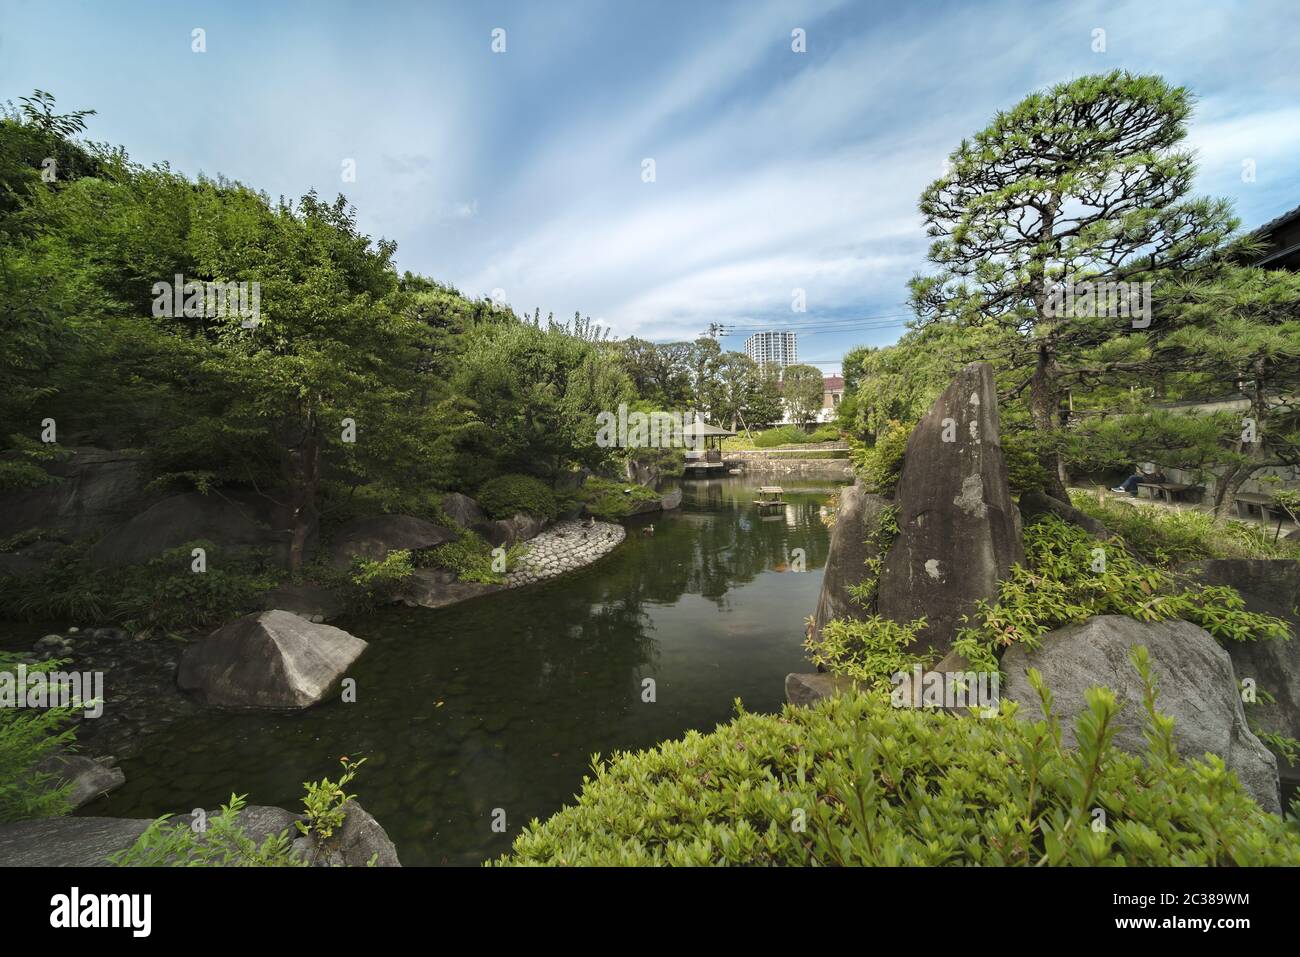 Central pond of Mejiro Garden which is surrounded by large flat stones on which ducks rest under the Stock Photo